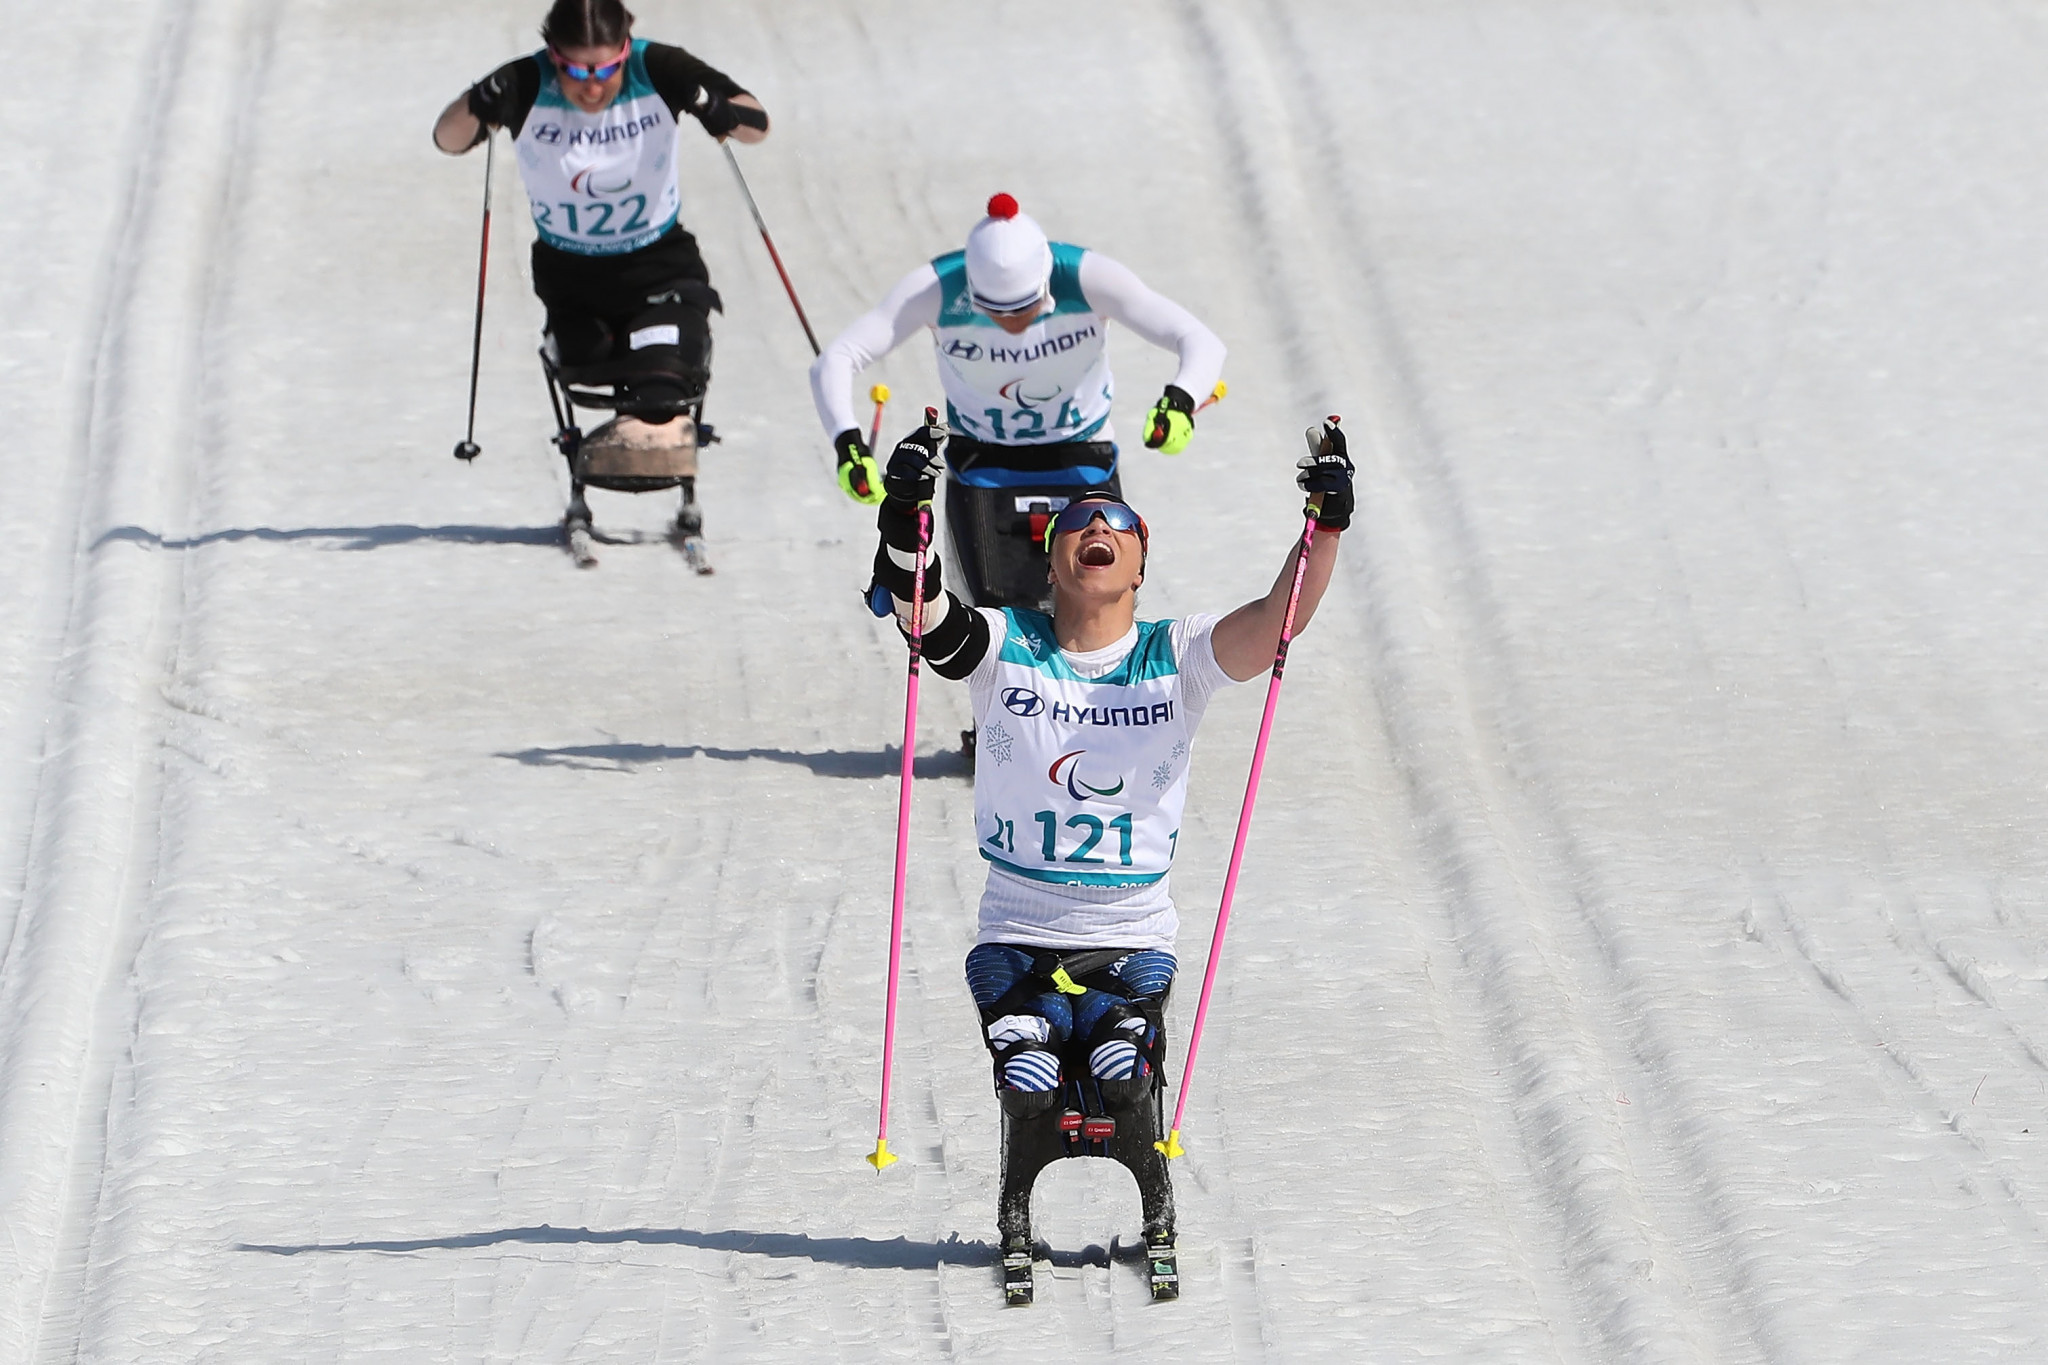 insidethegames is reporting LIVE from the Winter Paralympics in Pyeongchang